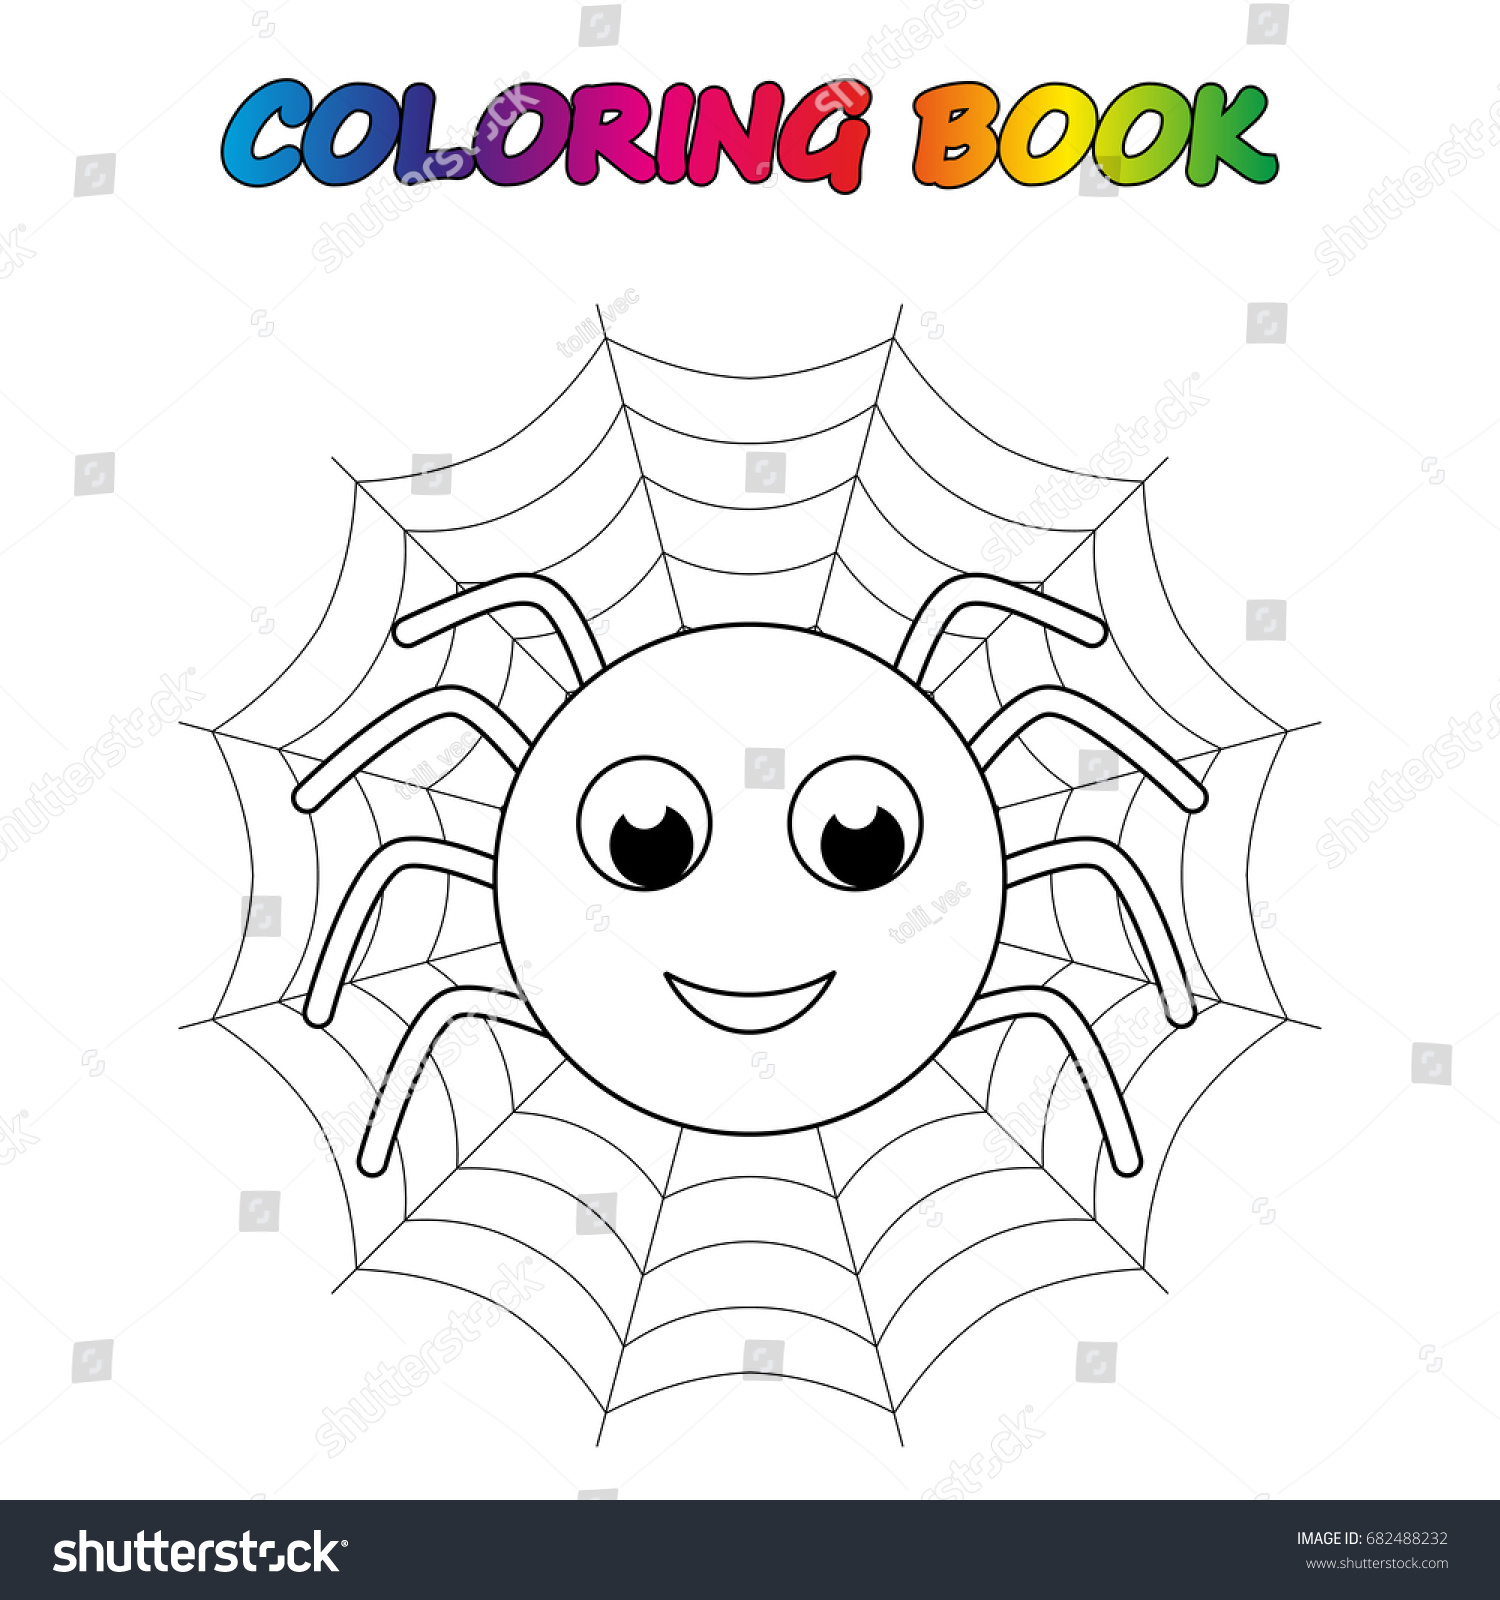 spider coloring book Coloring page to educate preschool kids Game for preschool kids